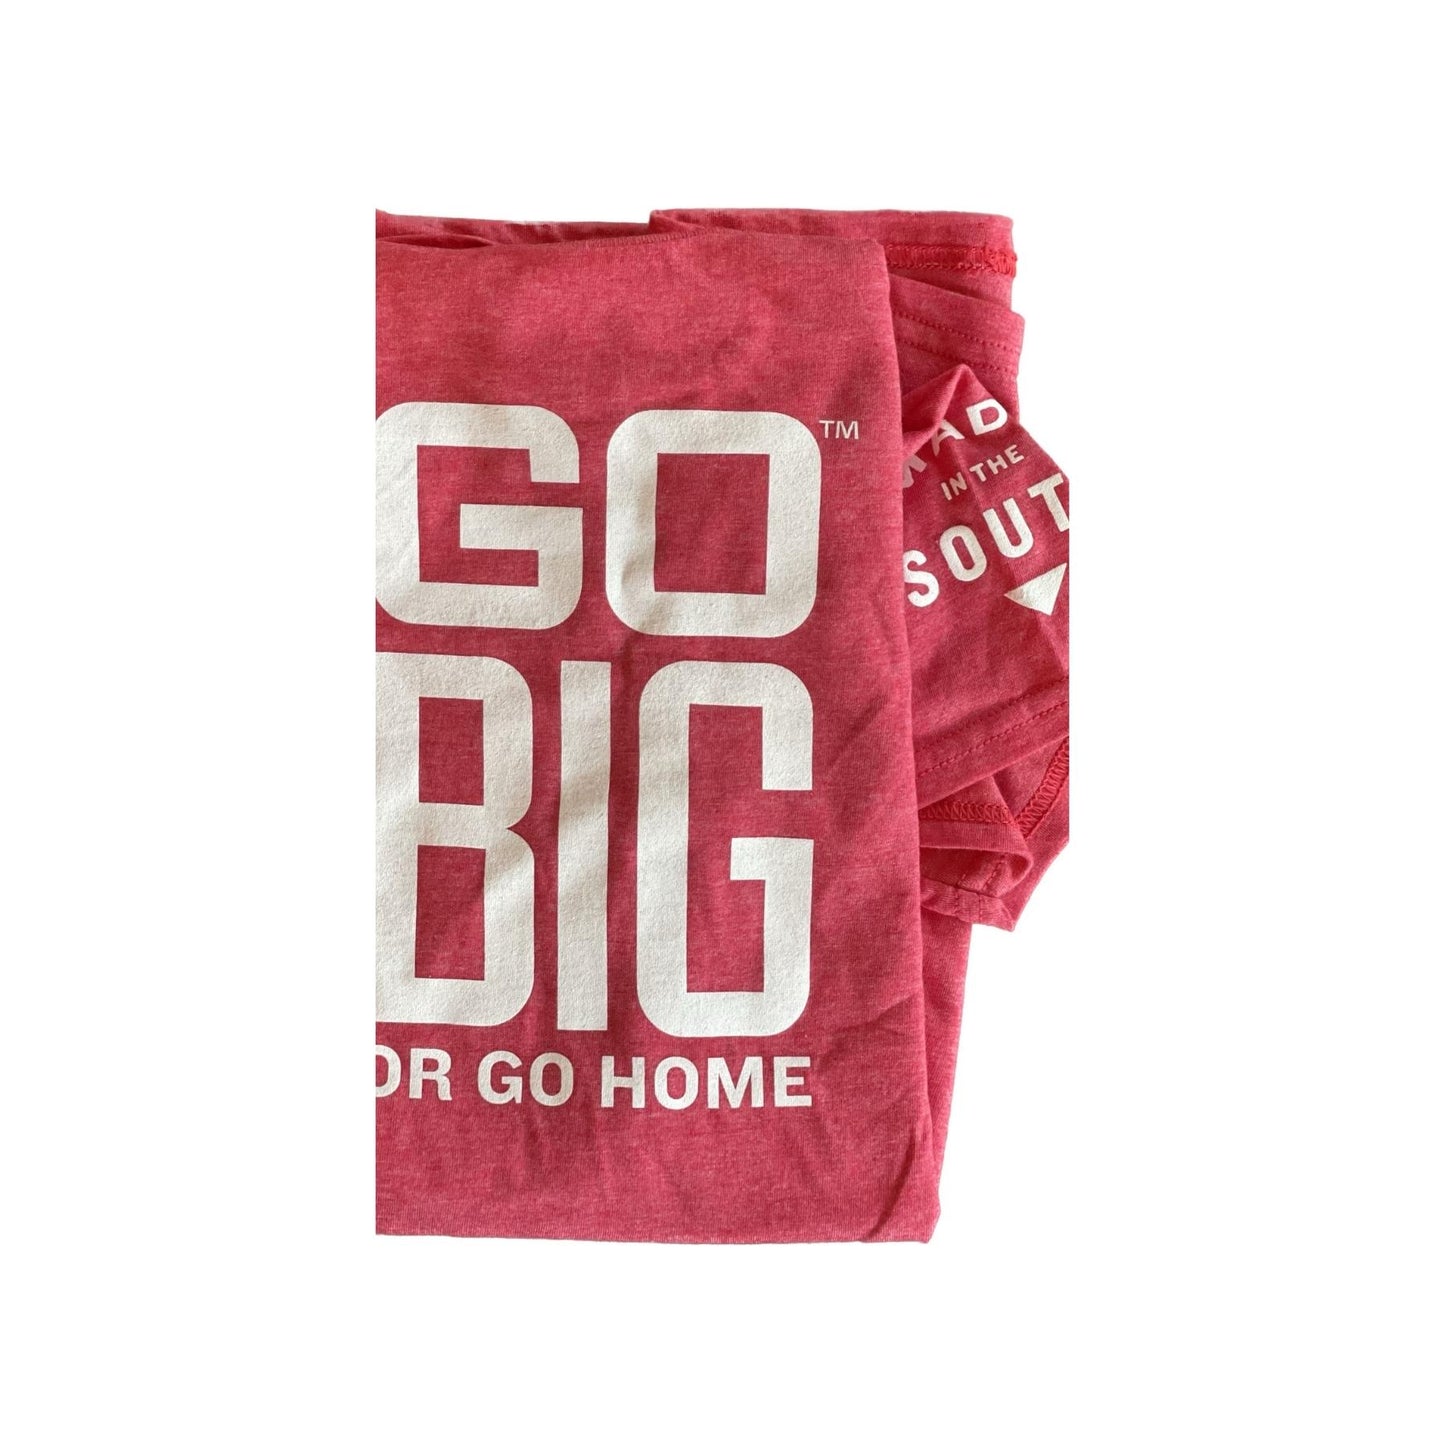 Go Big or Go Home - Red and White T-Shirt